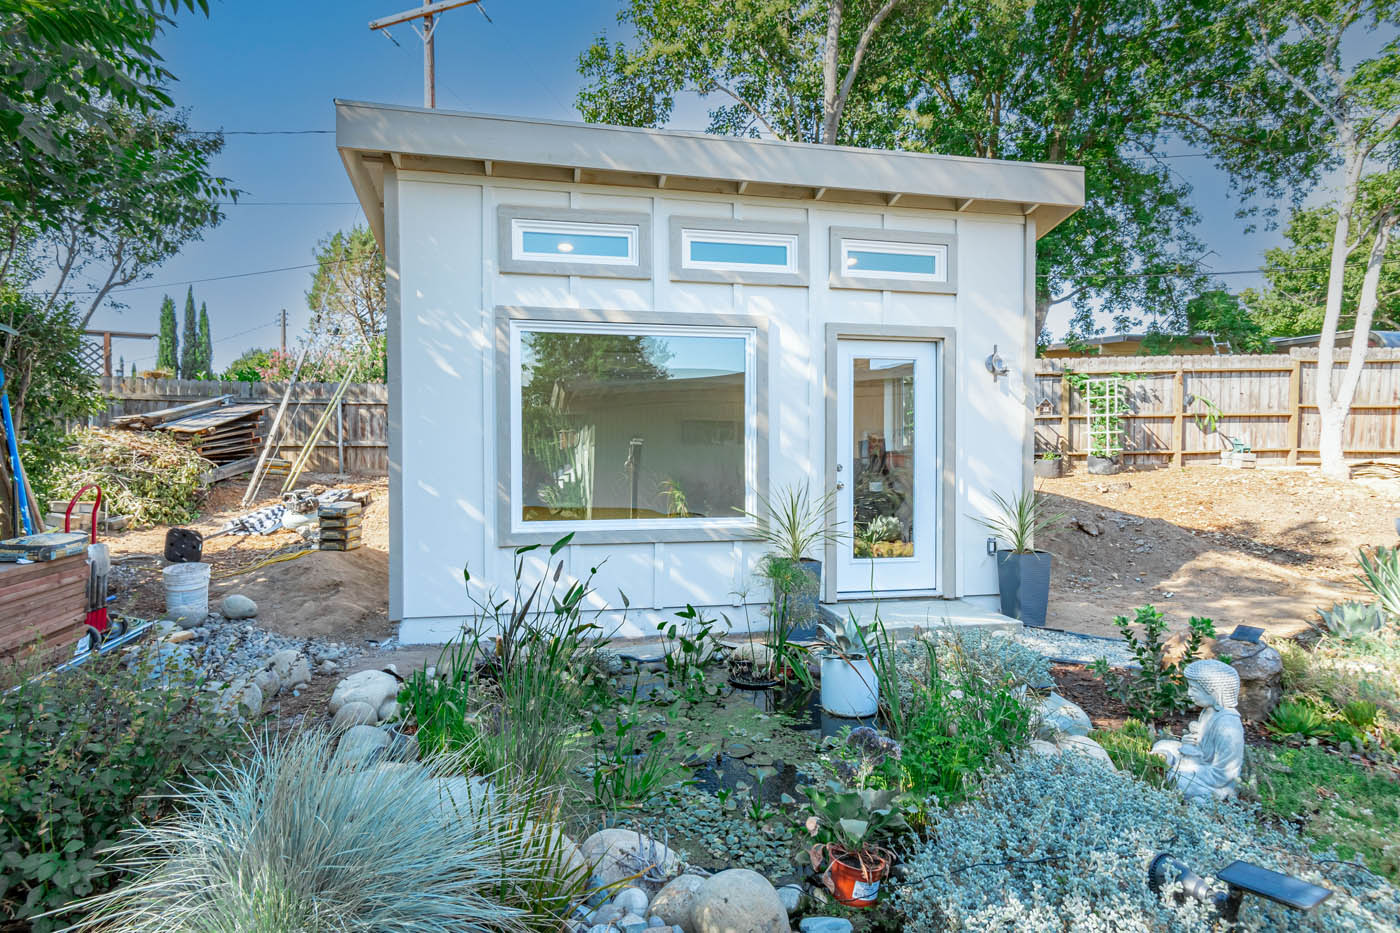 A Lancaster County detached ADU in a California backyard by a pool, learn more about our best tiny home builder in Lancaster County.